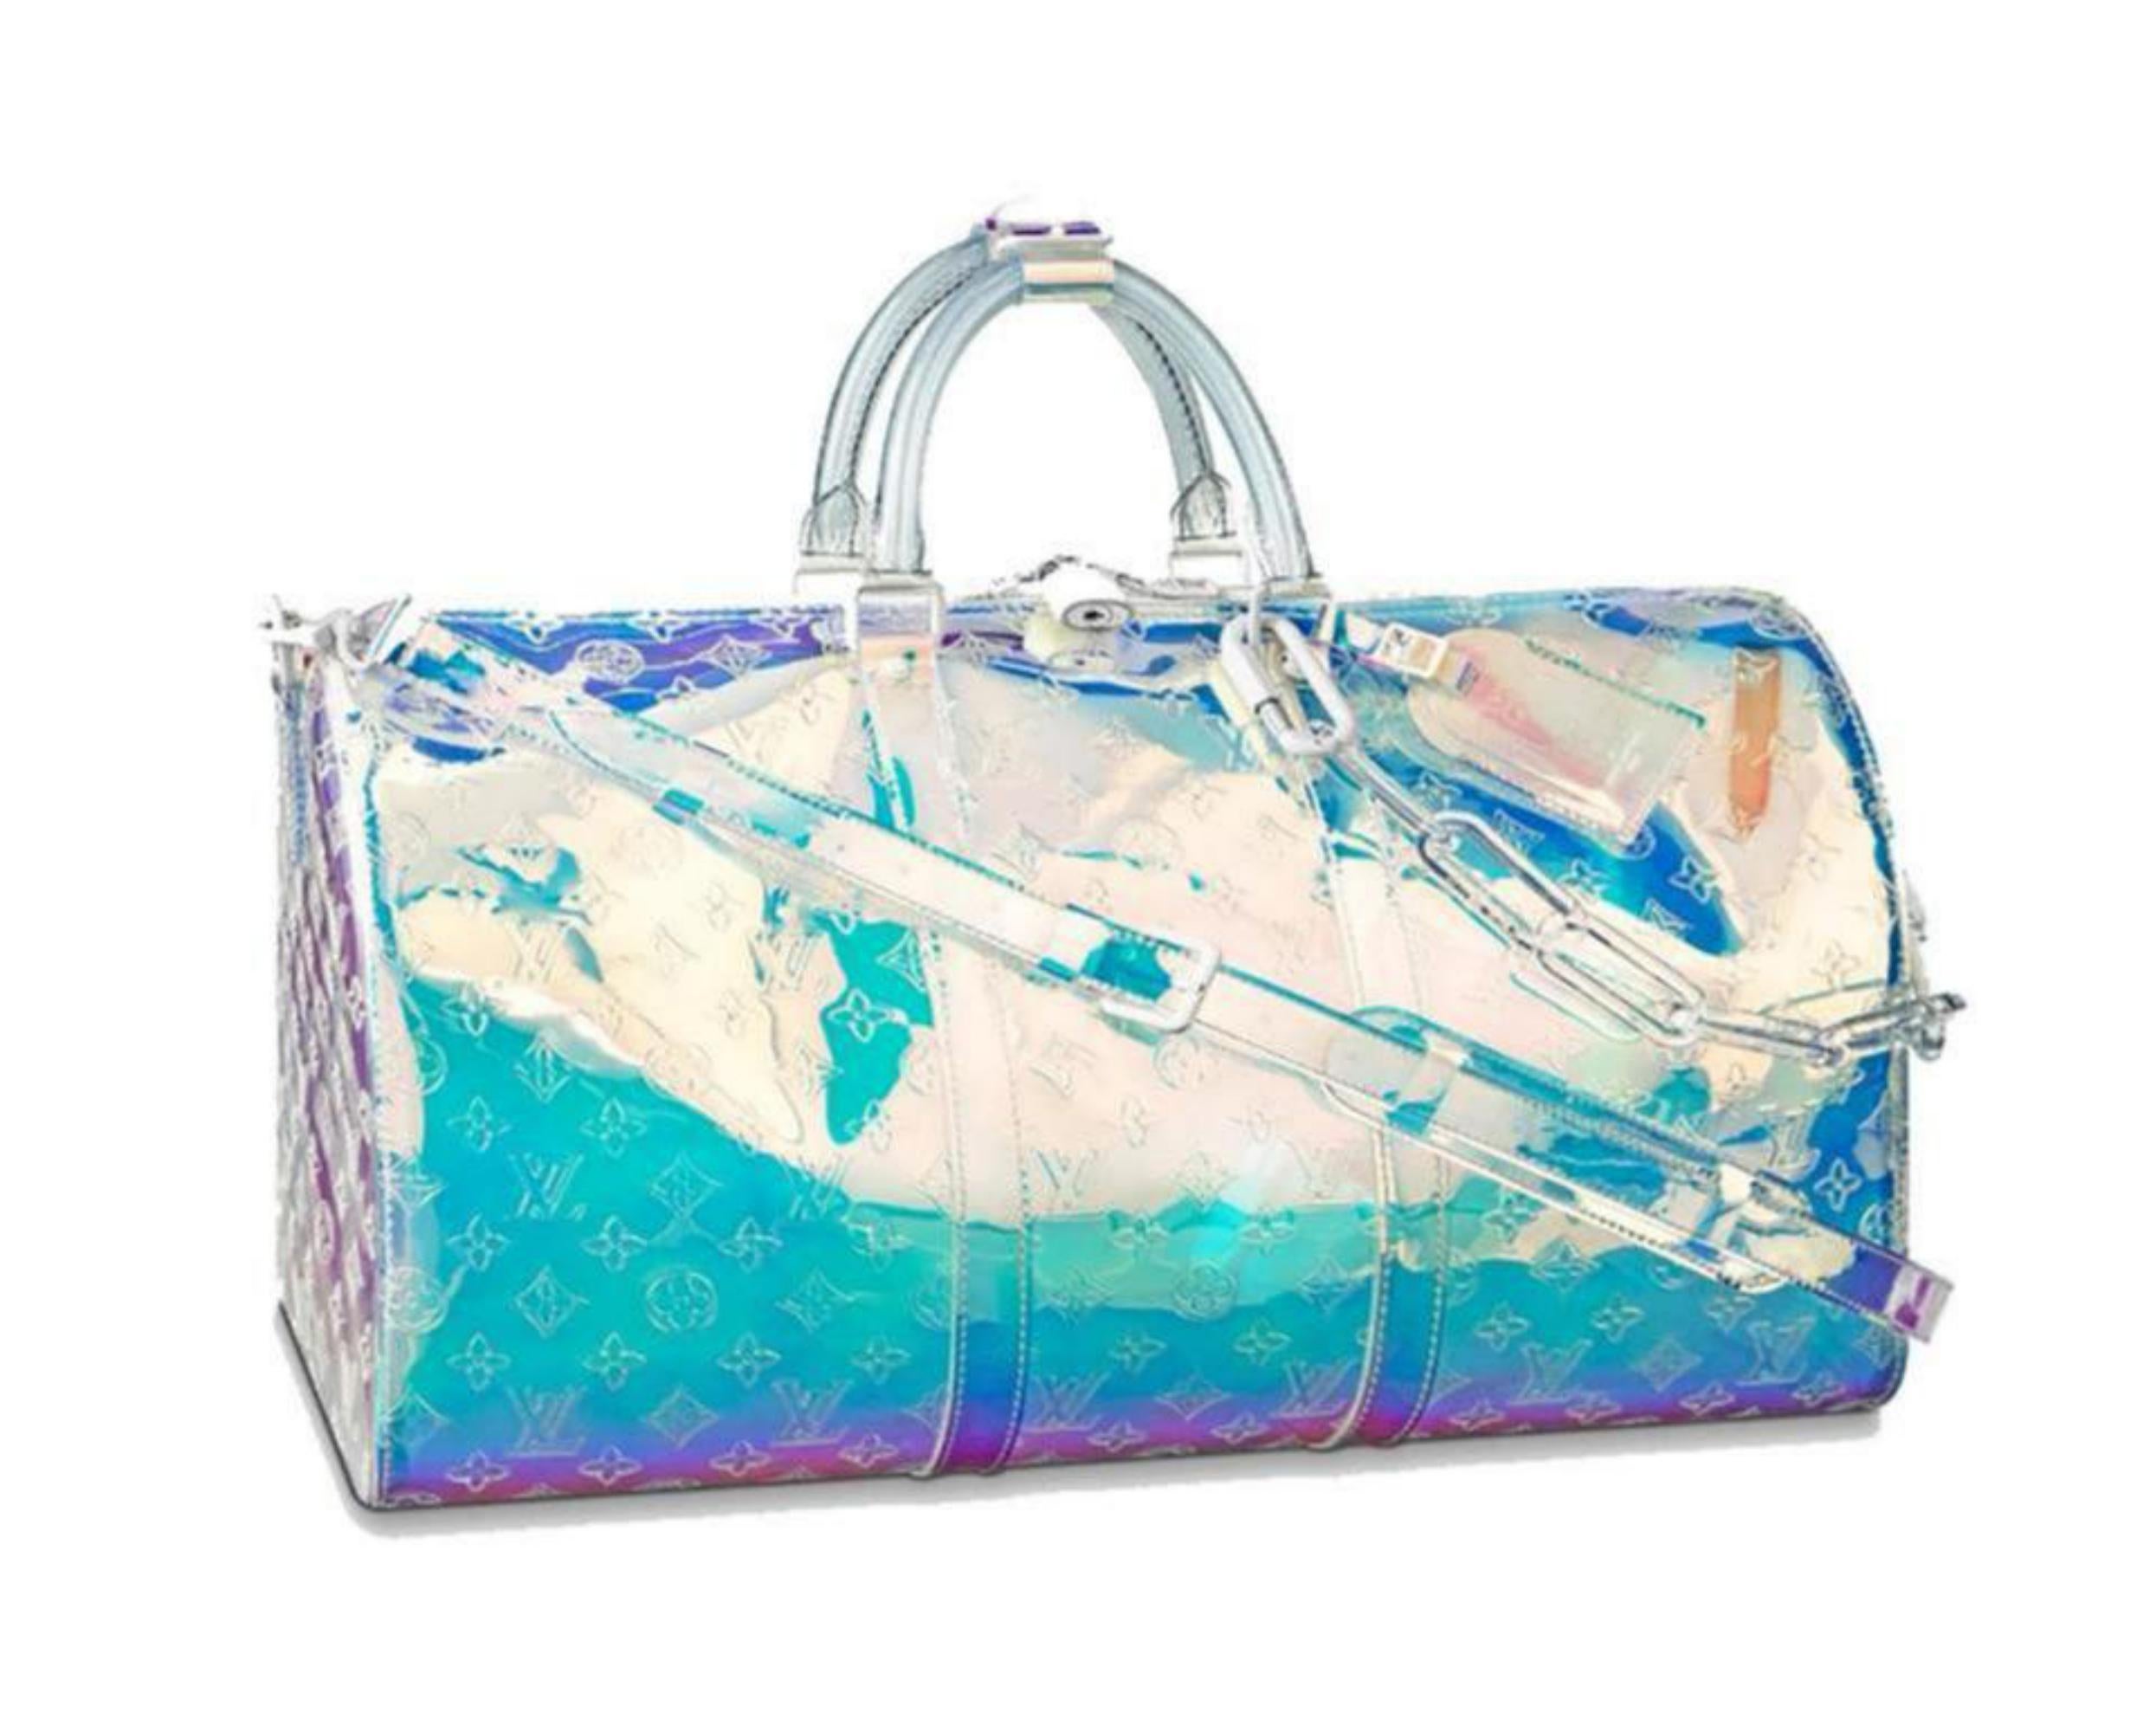 Louis Vuitton Keepall Ss19  Hologram Prism 50 Bandouliere 870370 Travel Bag For Sale 2